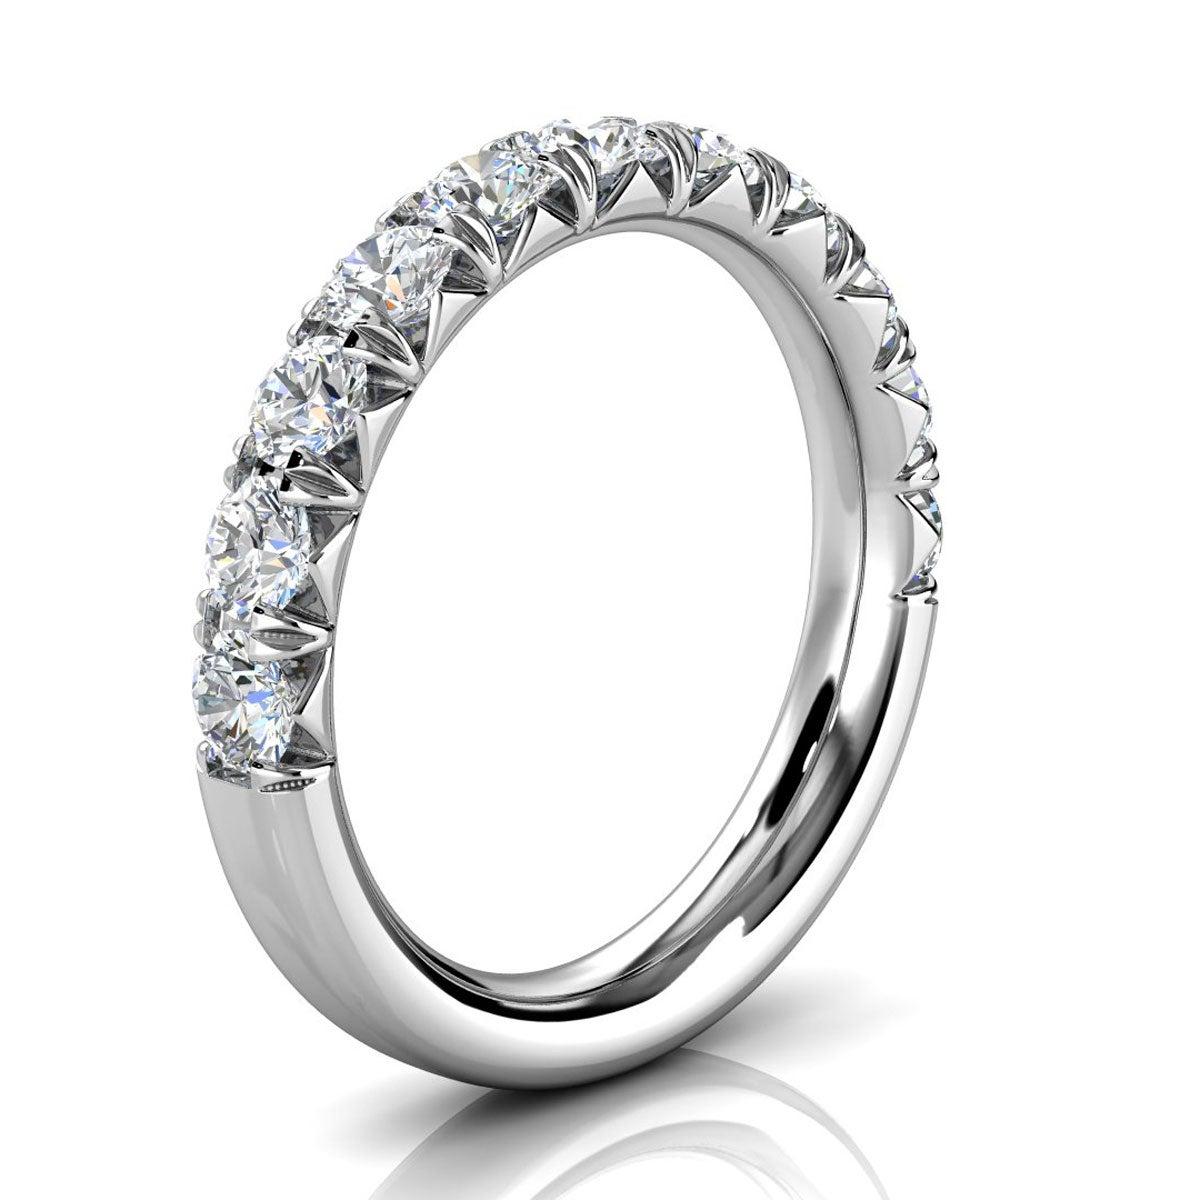 For Sale:  14k White Gold Voyage French Pave Diamond Ring '1 Ct. Tw' 2